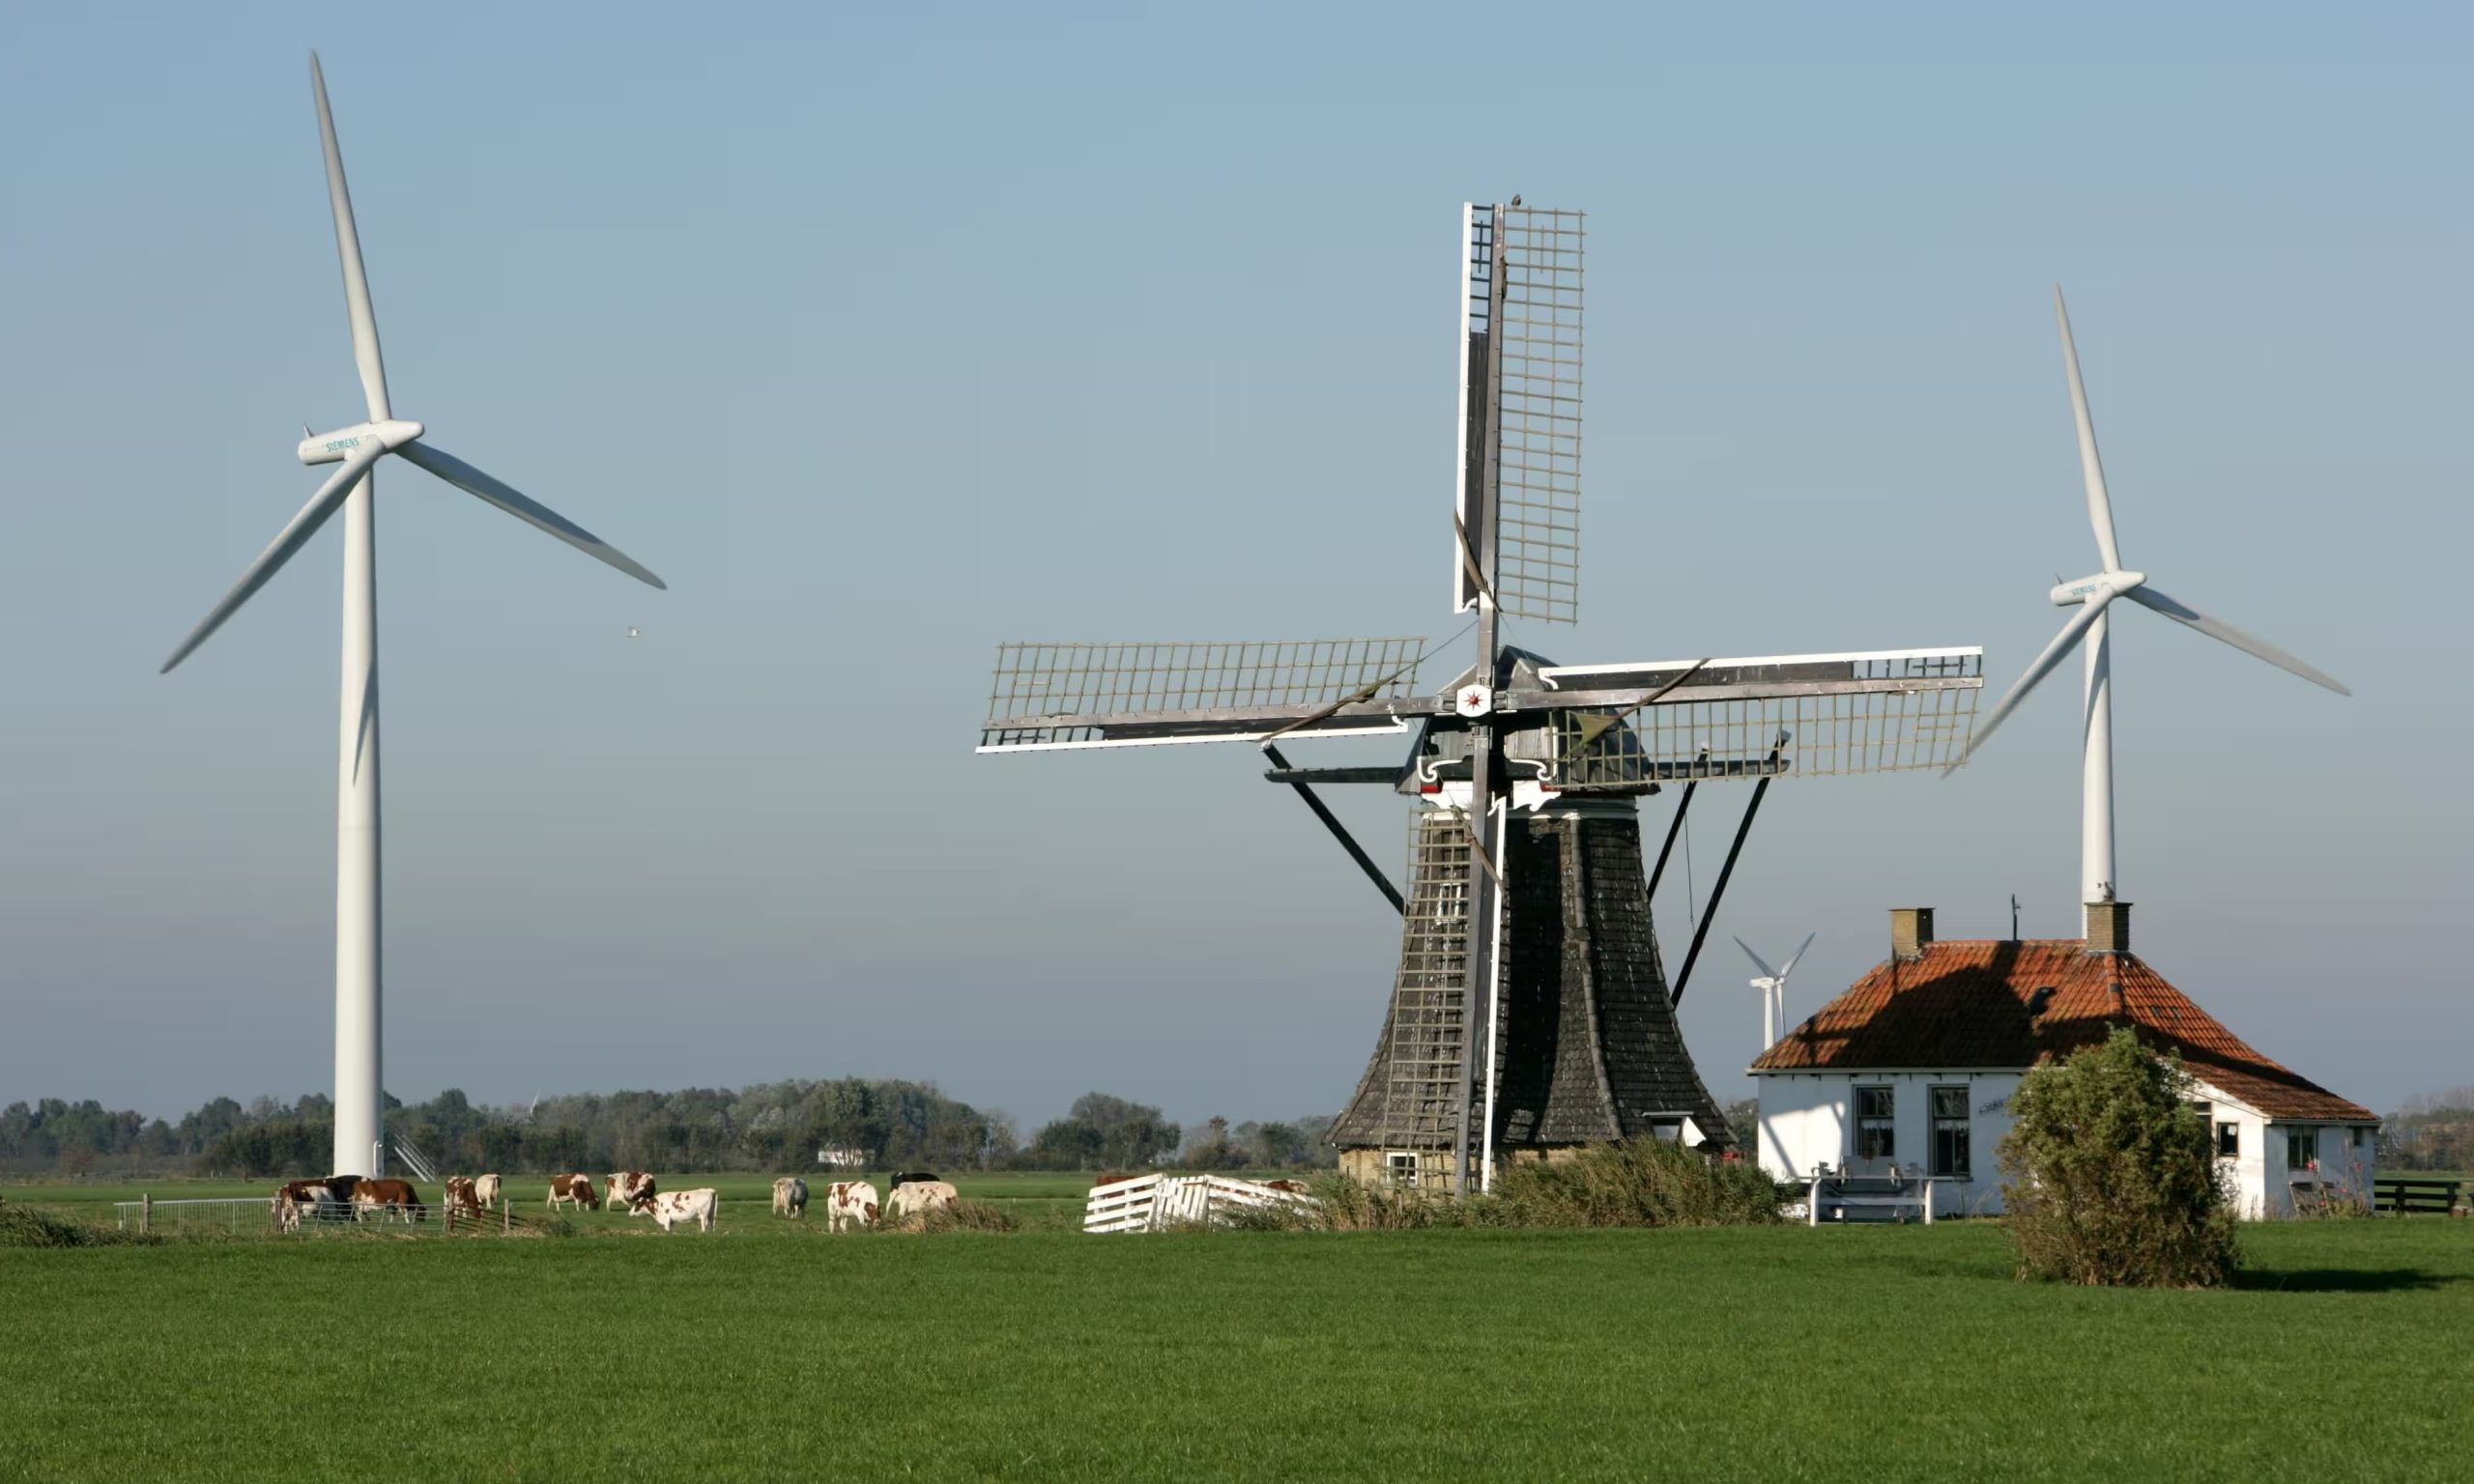 Historic windmill among modern wind turbines in the Netherlands. More than half of the emissions drop came from the use of cleaner electricity. Photograph: Alamy